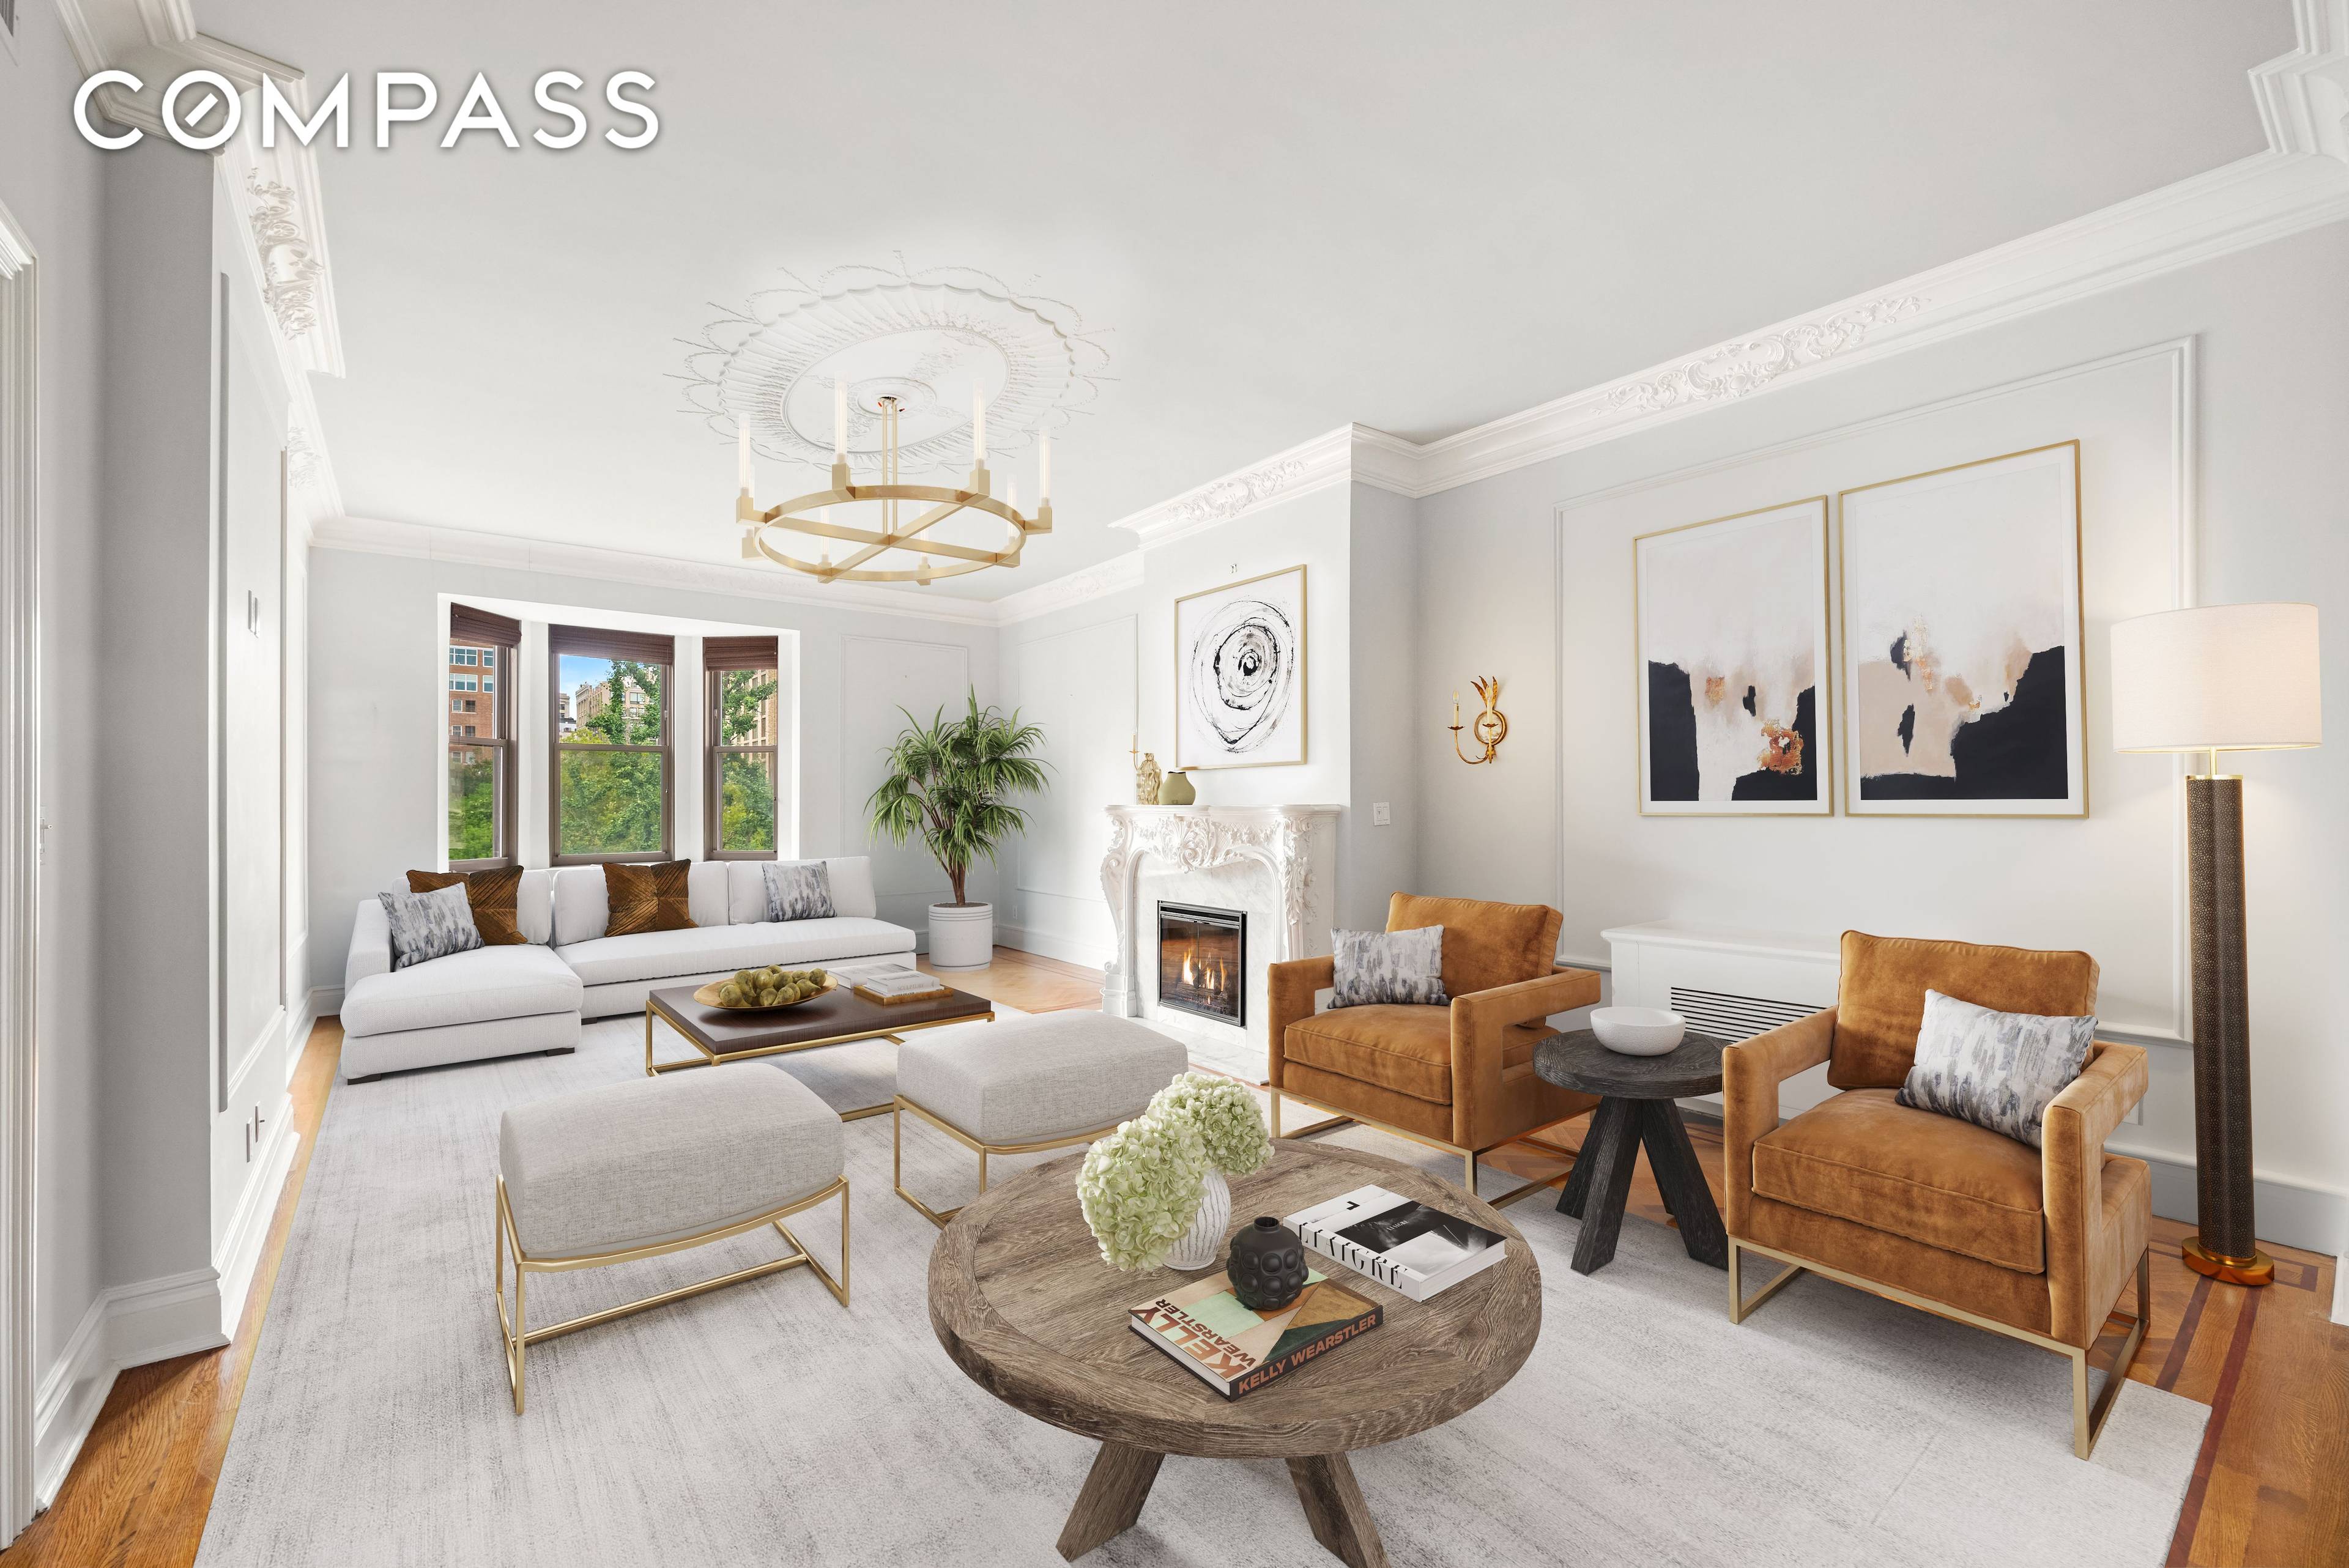 36 Gramercy Park East is one of the most beautiful historical Buildings the heart of GRAMERCY PARK Truly one of kind Prewar Beauty with breathtaking Gramercy Park Views !